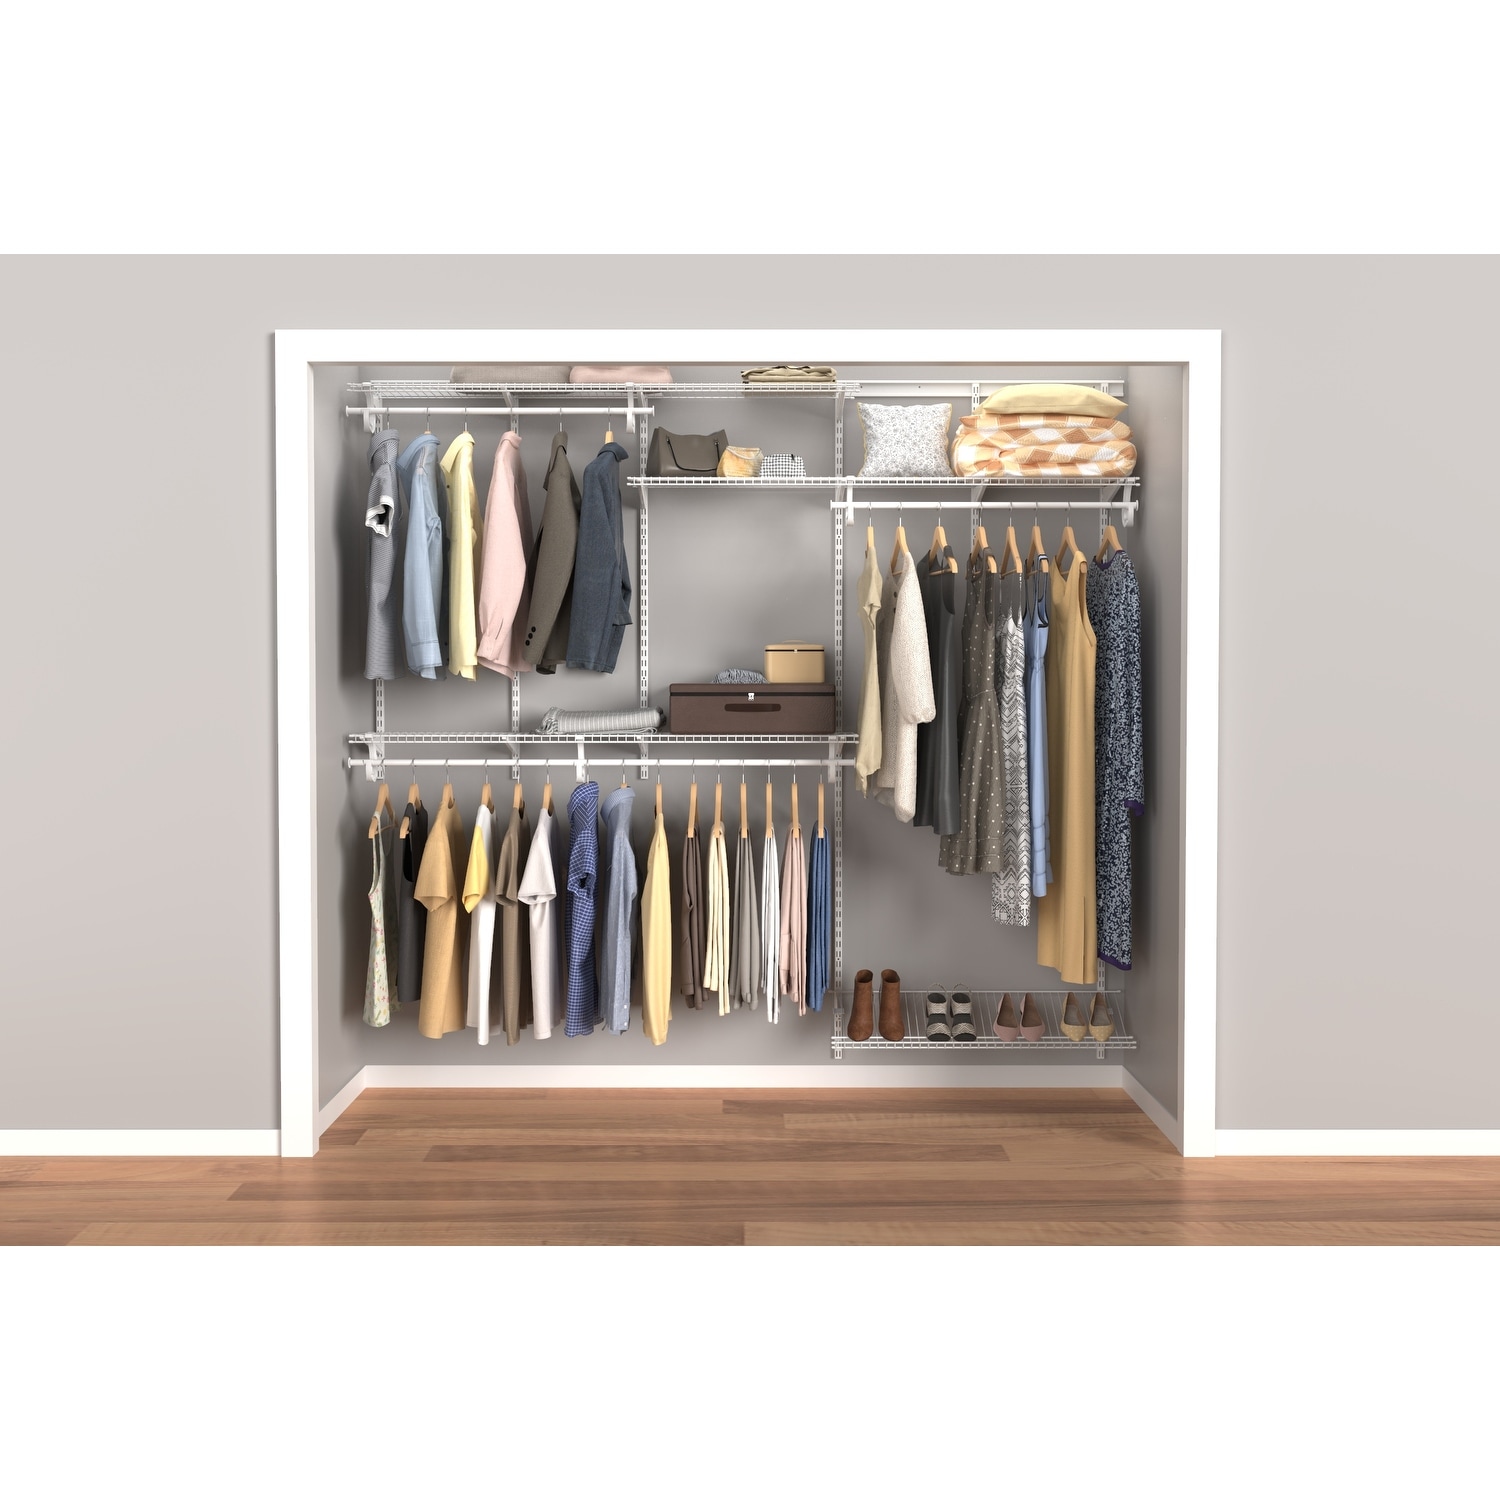 https://ak1.ostkcdn.com/images/products/is/images/direct/f77be2c093f5a695eec8a2f99224ba7556757835/ClosetMaid-ShelfTrack-5ft-to-8ft-Closet-Organizer-Kit%2C-White.jpg